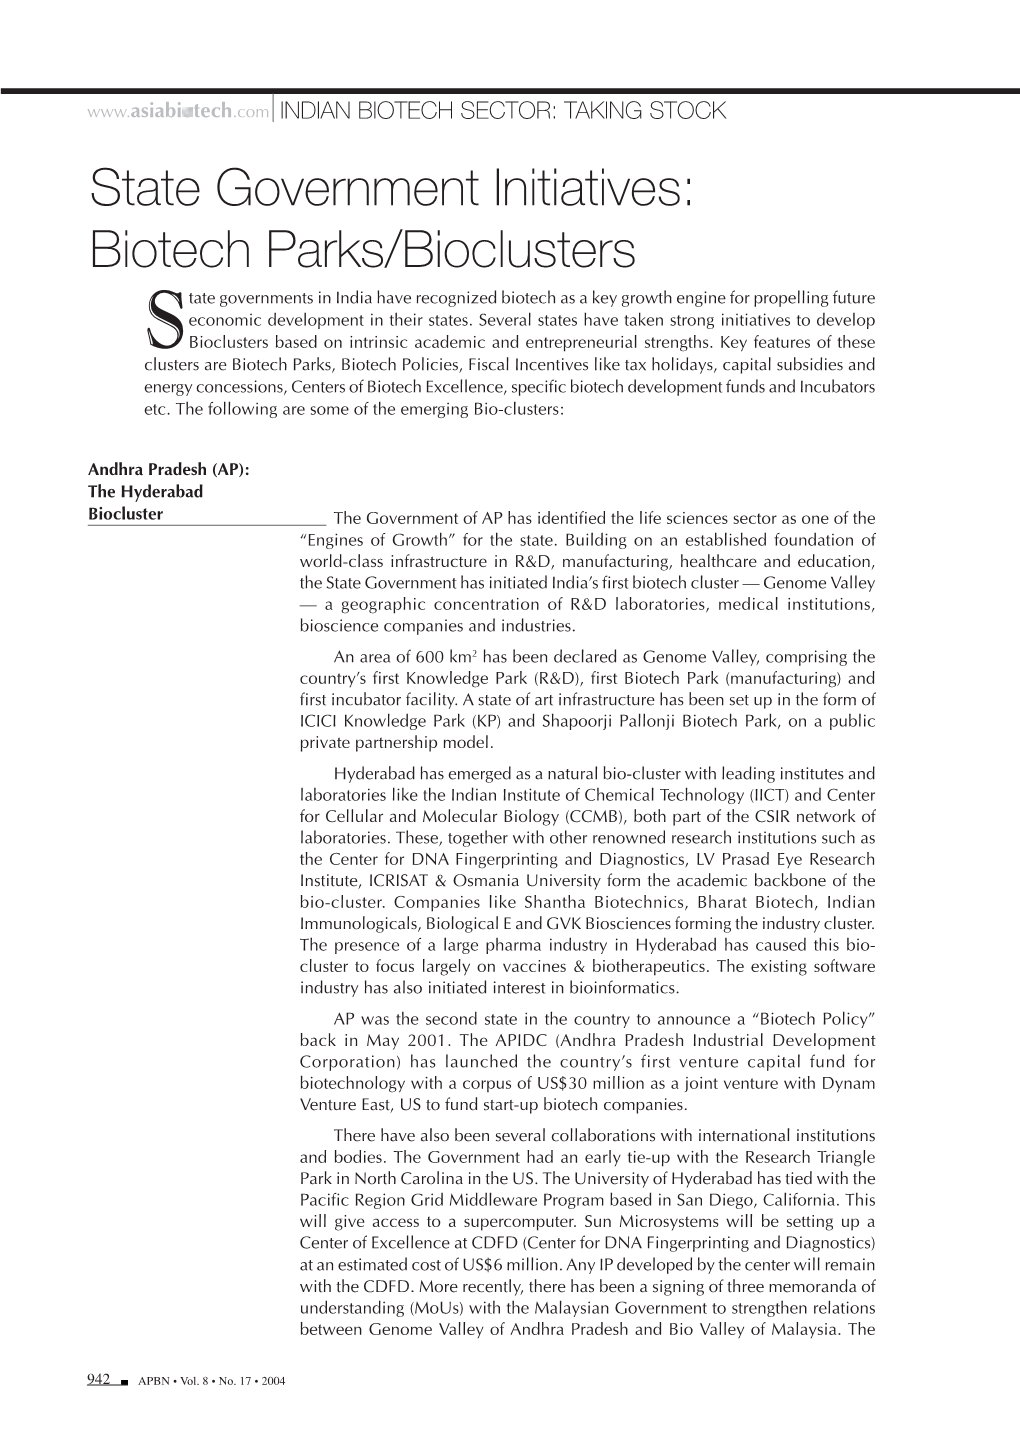 State Government Initiatives: Biotech Parks/Bioclusters